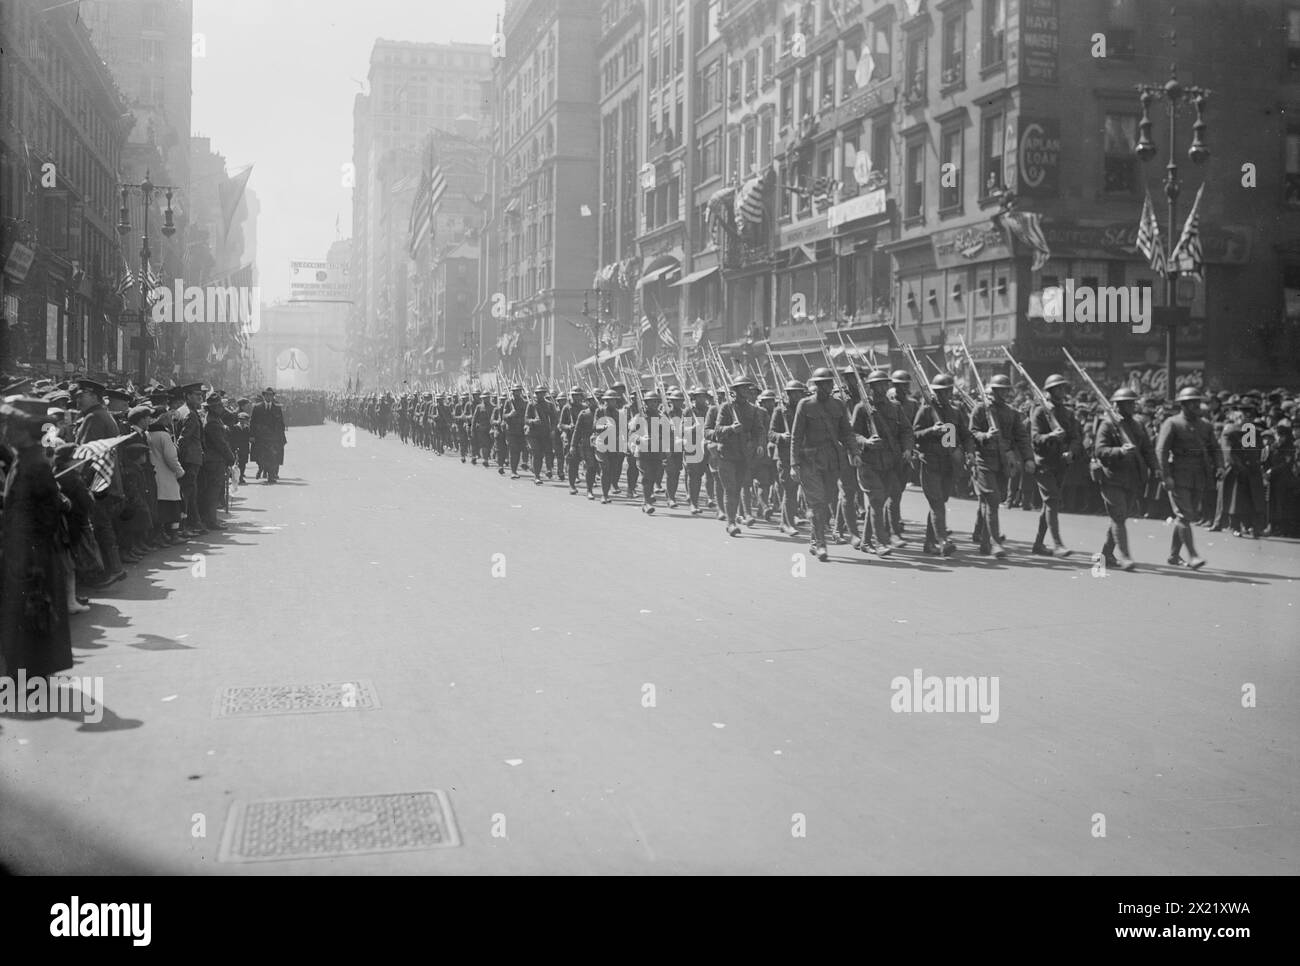 27th Parade, Mar 1918. Parade for the soldiers of the U.S. Army 27th Division in New York City after World War I. Stock Photo